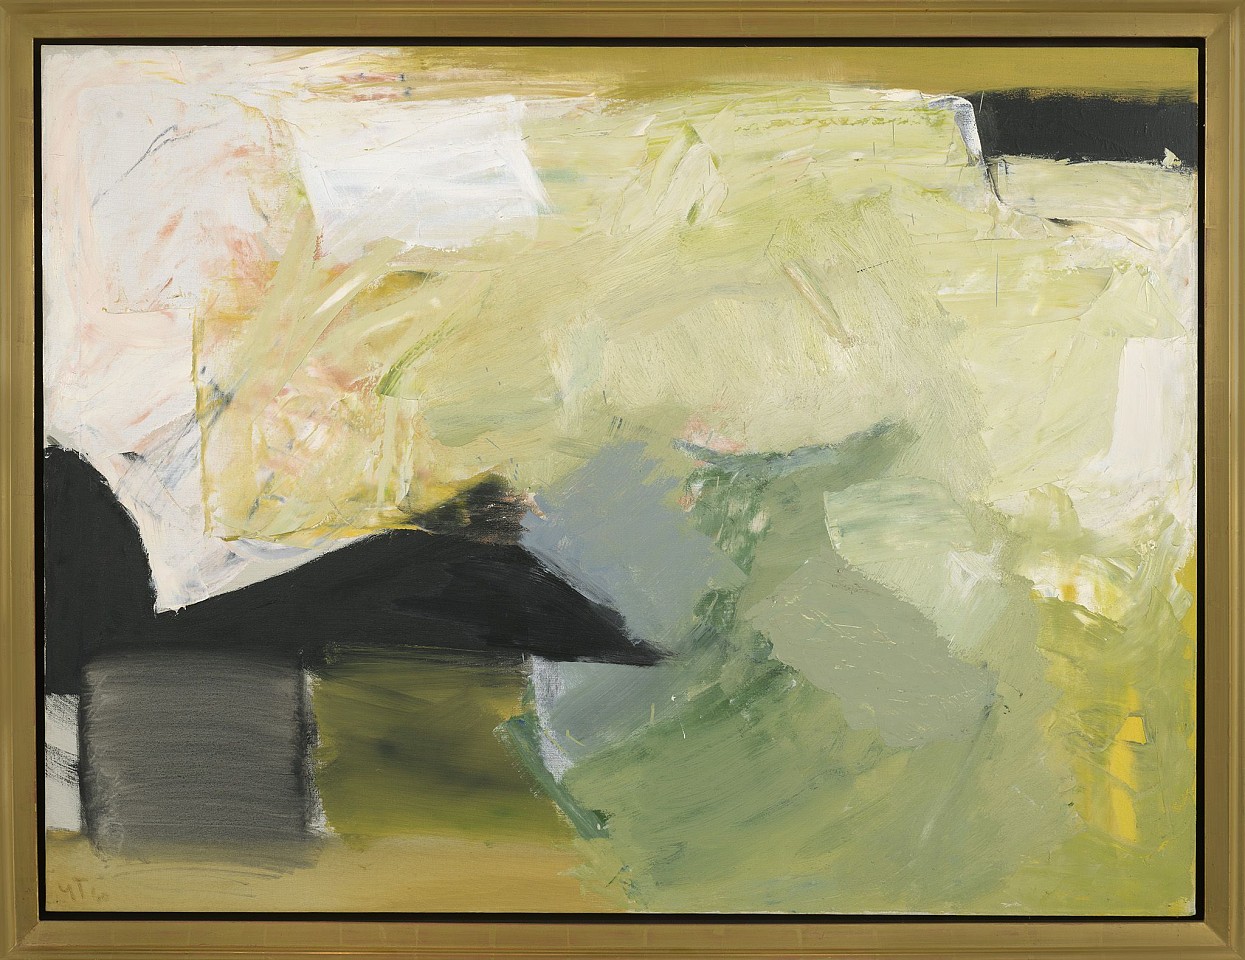 Yvonne Thomas, Mirage | SOLD, 1960
Oil on canvas, 36 x 48 in. (91.4 x 121.9 cm)
THO-00122